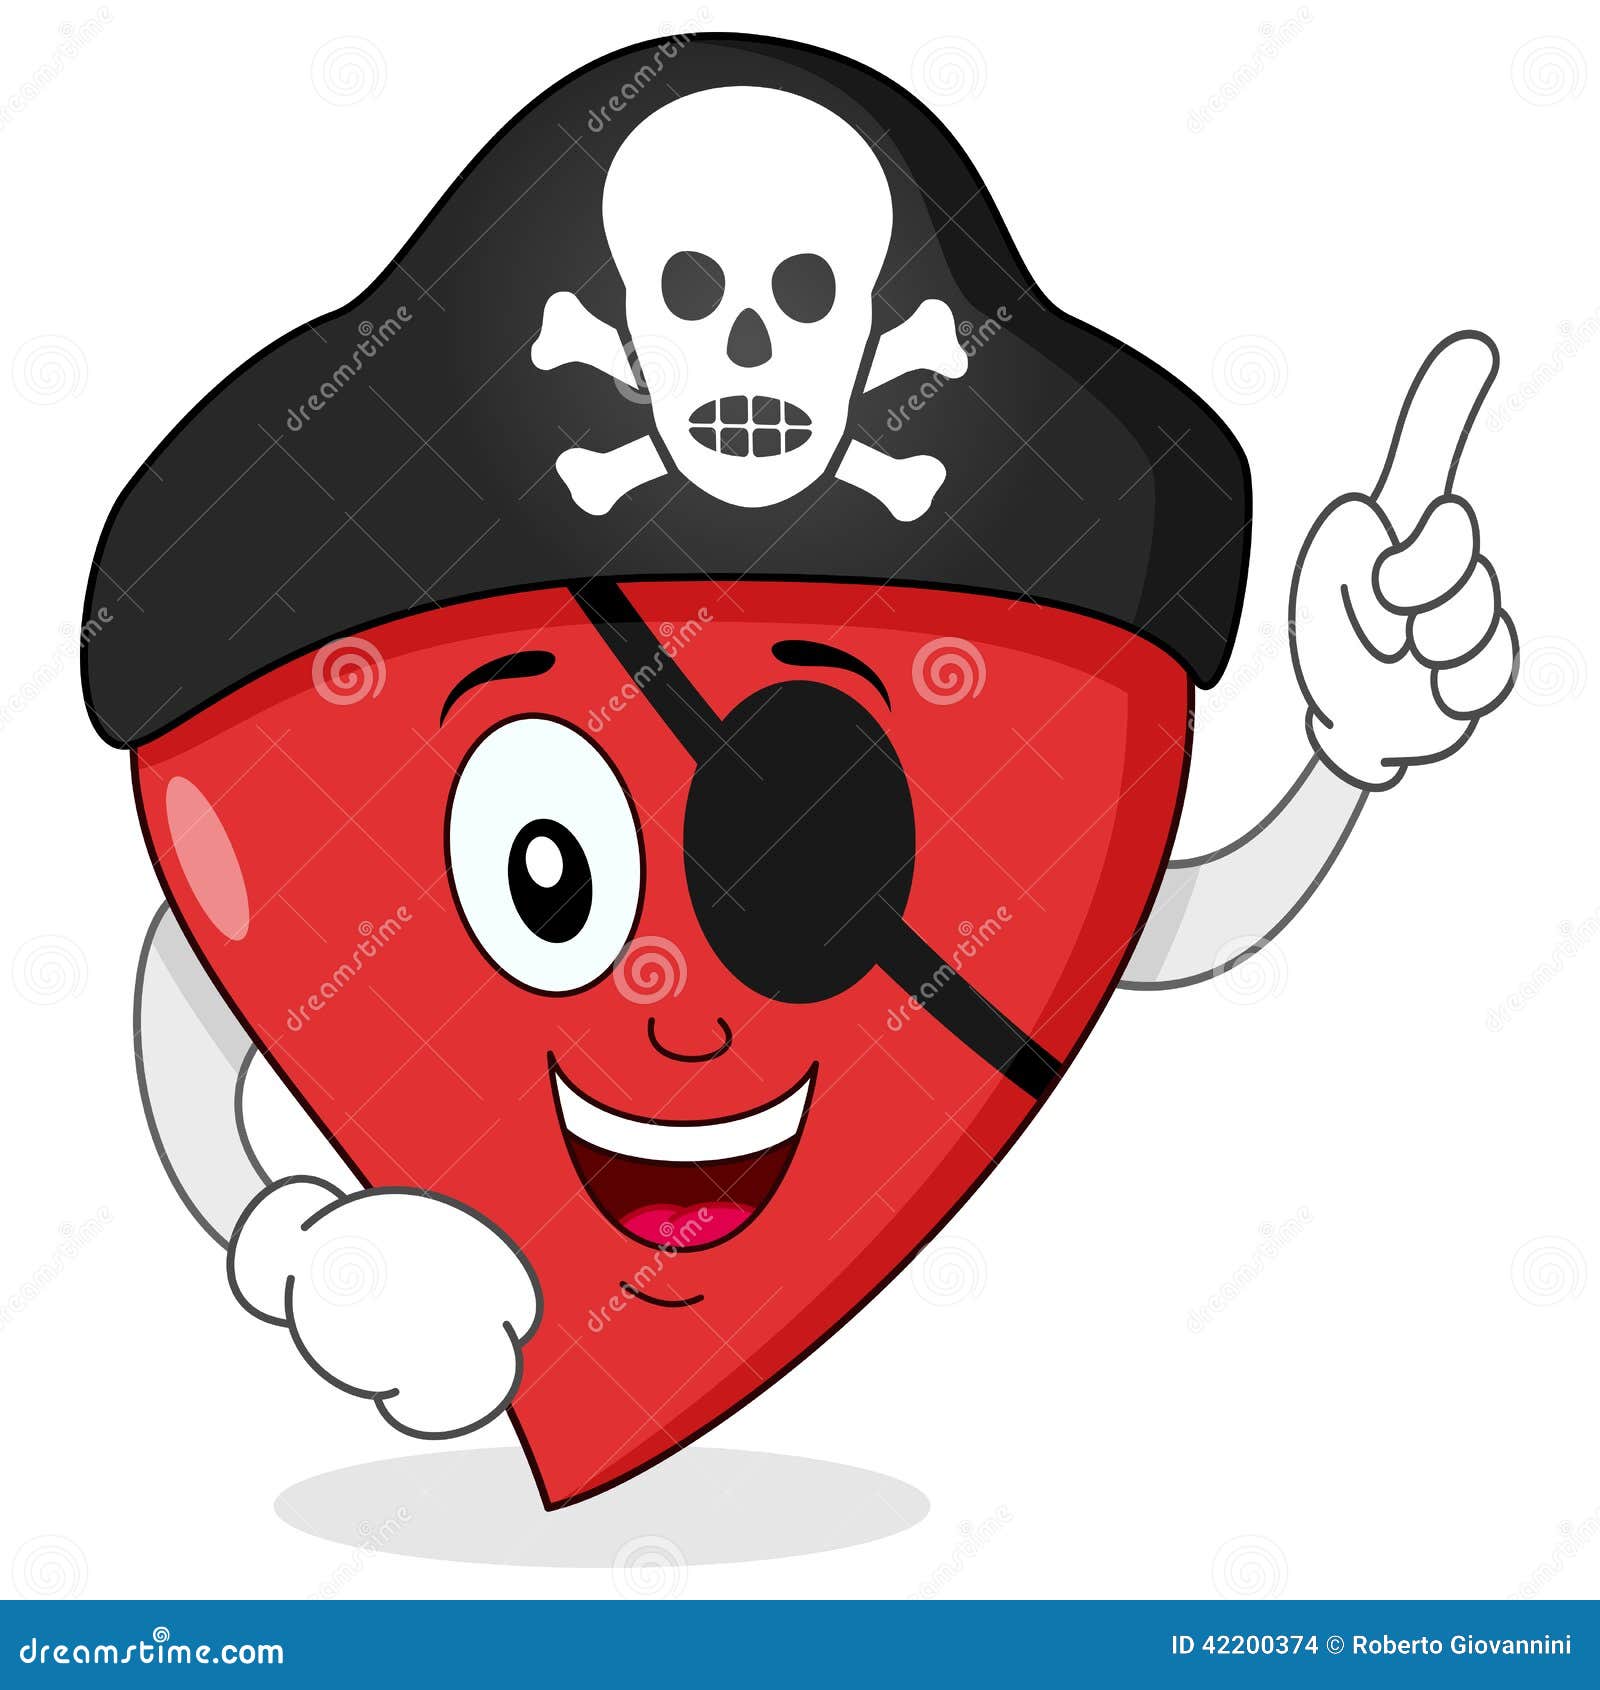 https://thumbs.dreamstime.com/z/pirate-heart-eye-patch-character-funny-cartoon-red-hat-isolated-white-background-eps-file-available-42200374.jpg